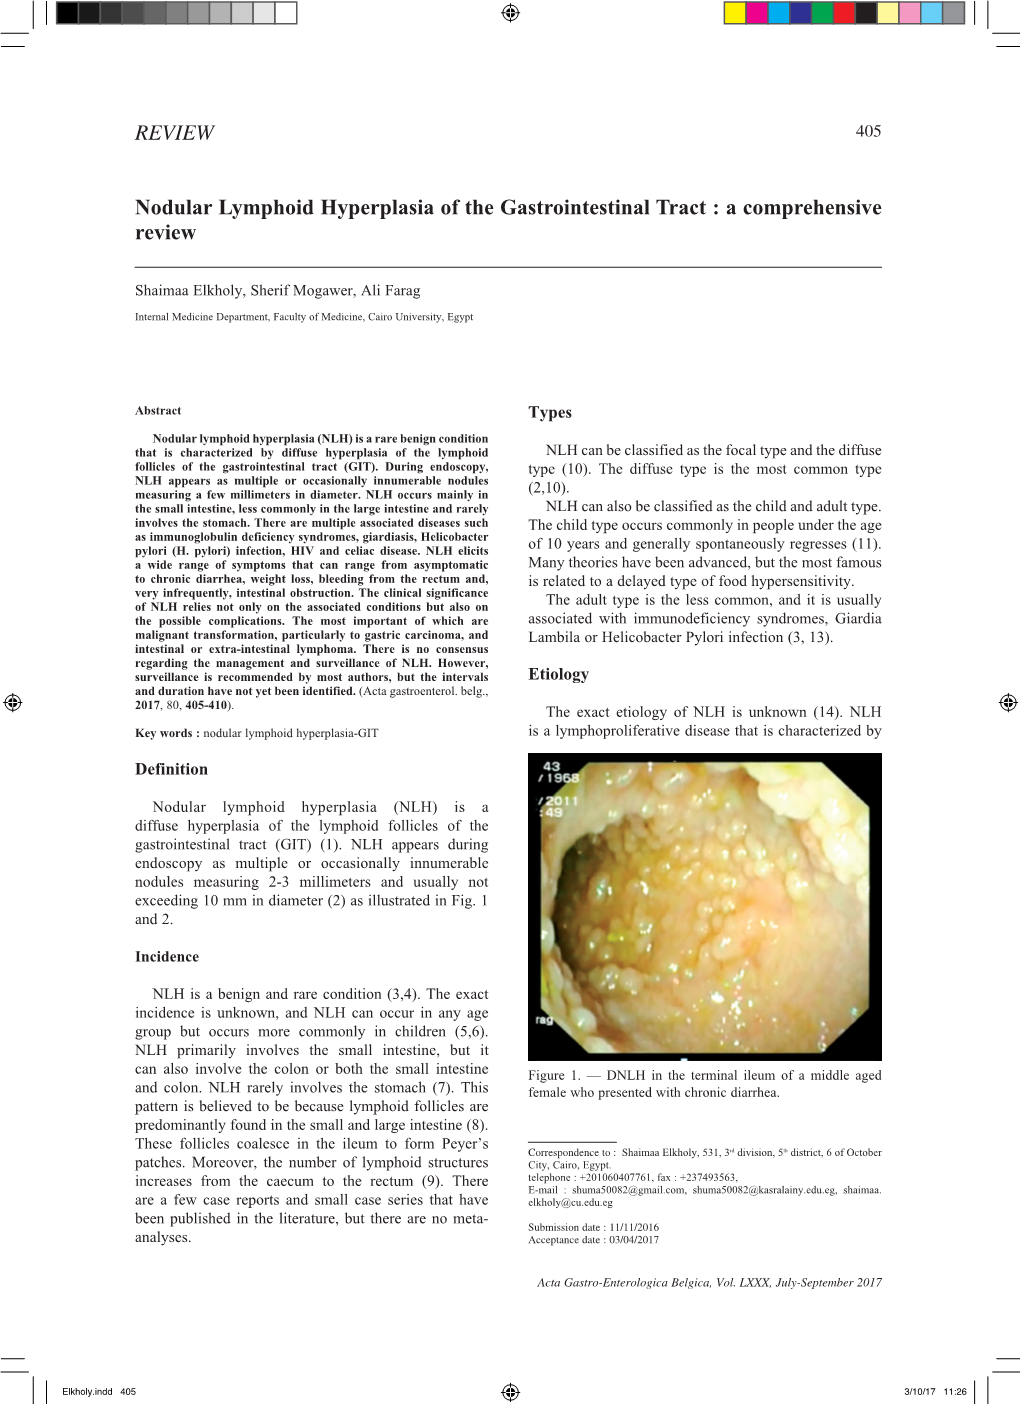 REVIEW Nodular Lymphoid Hyperplasia of the Gastrointestinal Tract